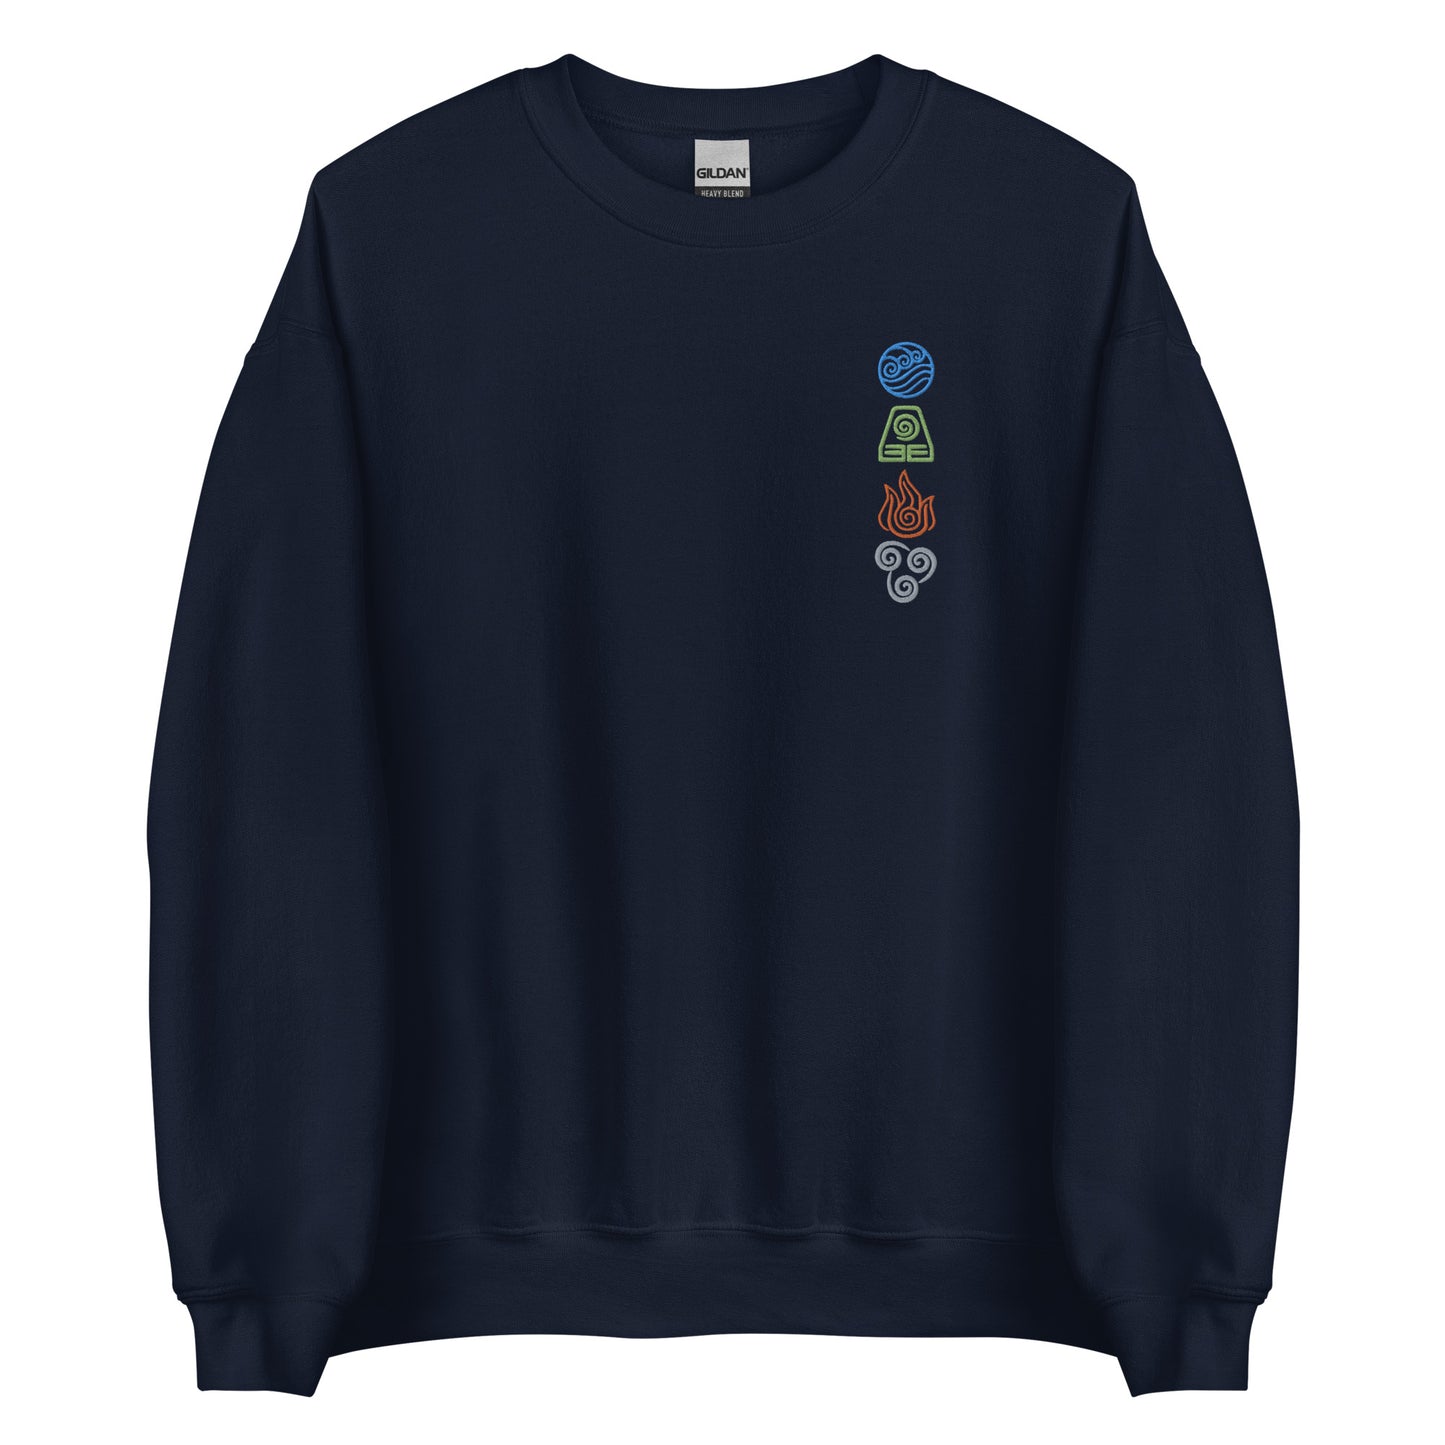 Fire Earth Air Waters Sweatshirt Embroidered sweater